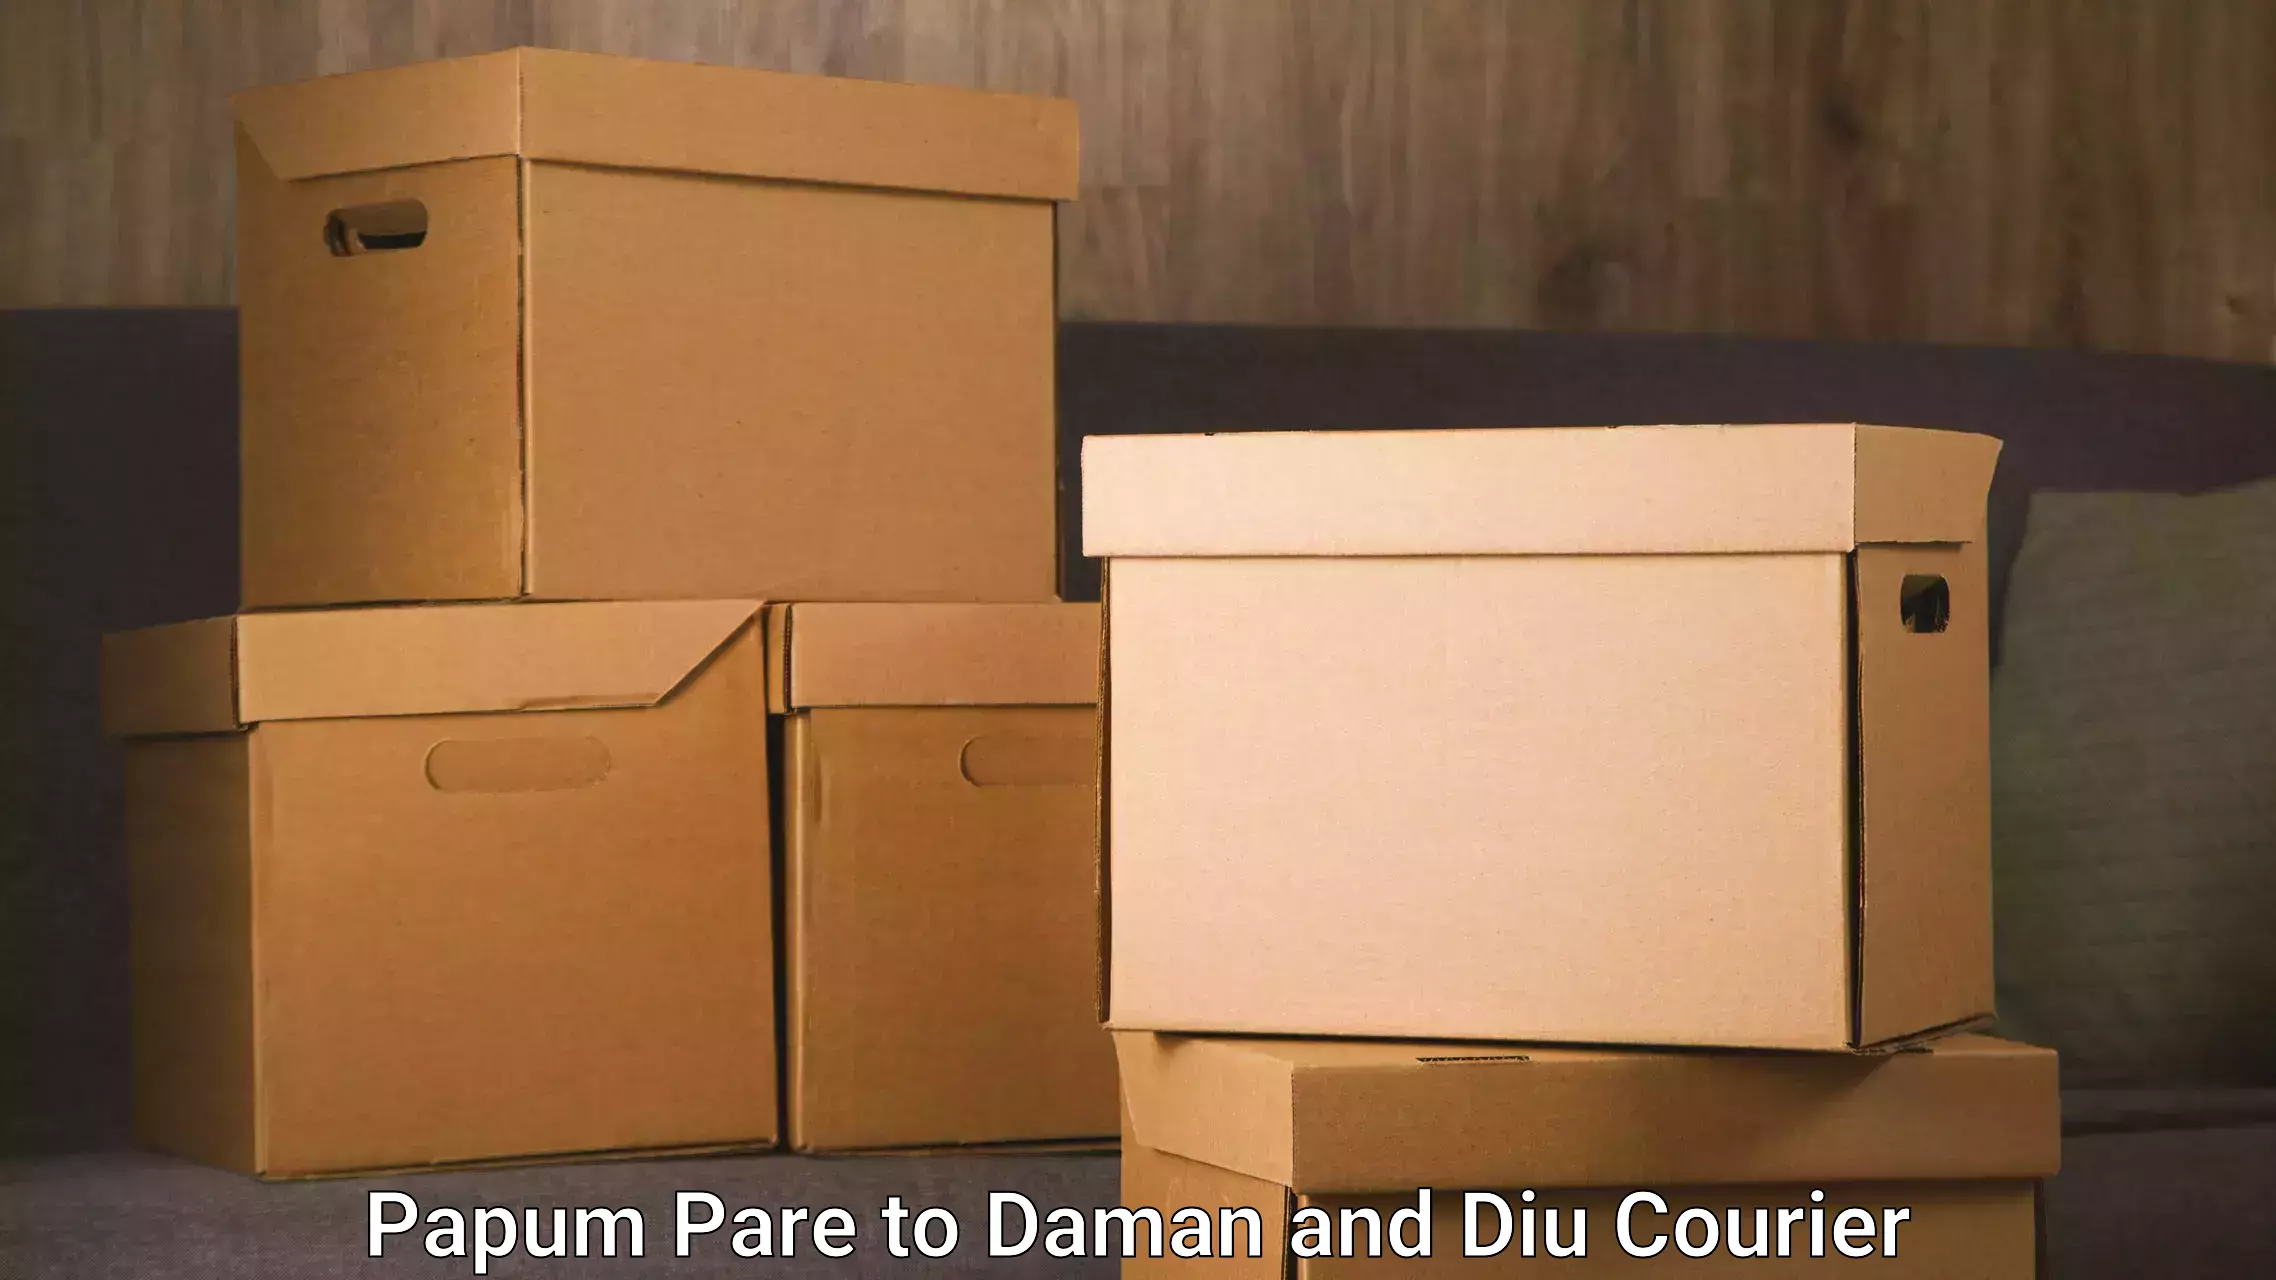 Courier service innovation Papum Pare to Daman